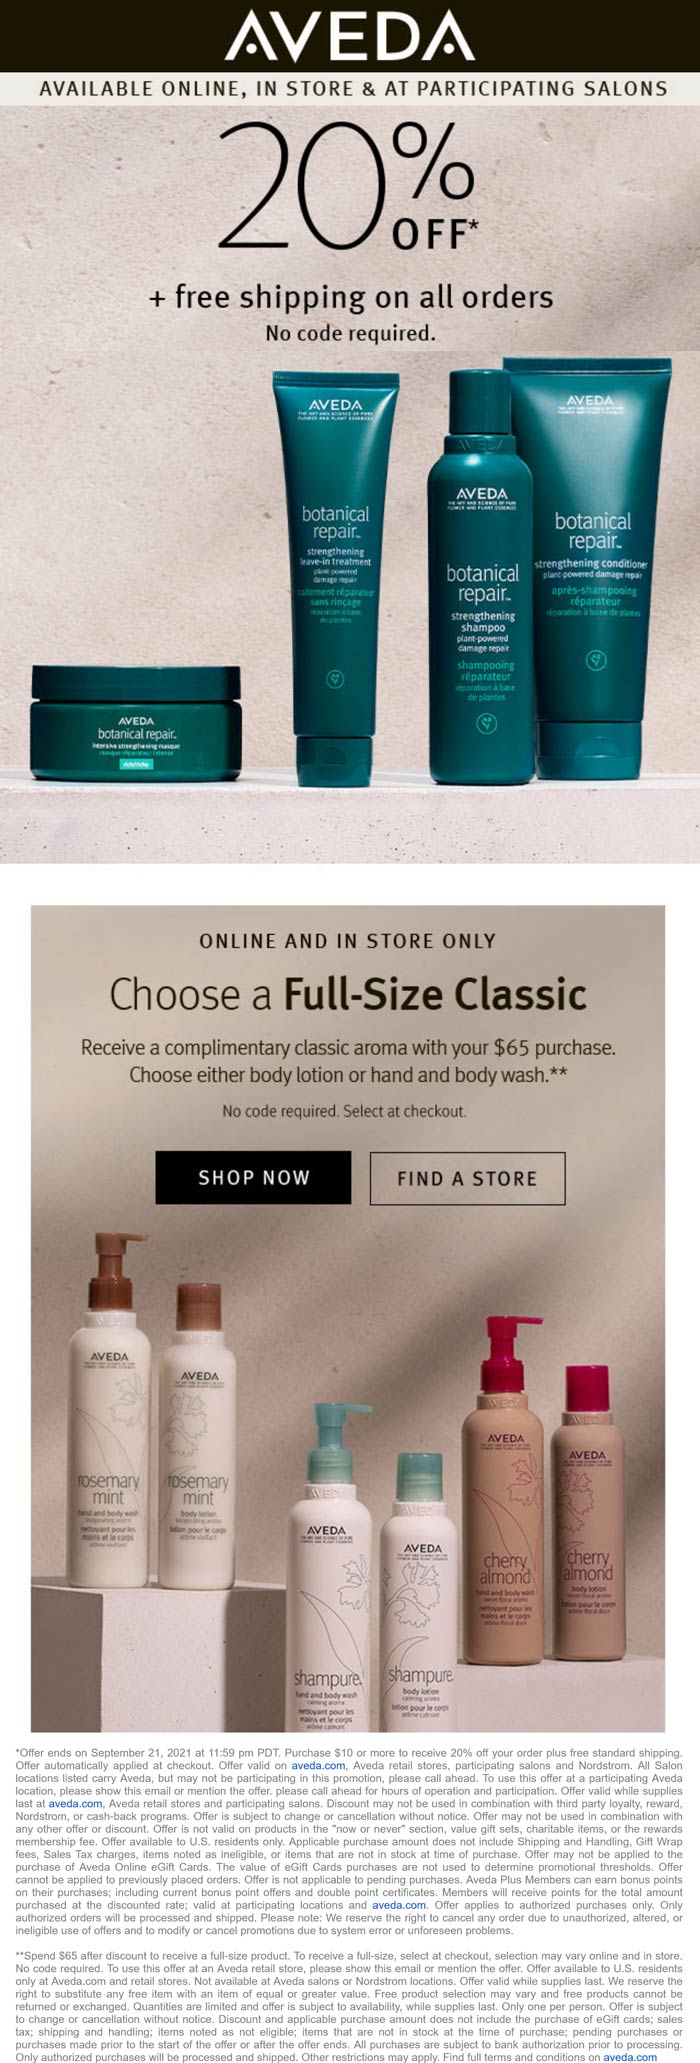 AVEDA stores Coupon  20% off + free full size with $65 spent at AVEDA, ditto online #aveda 